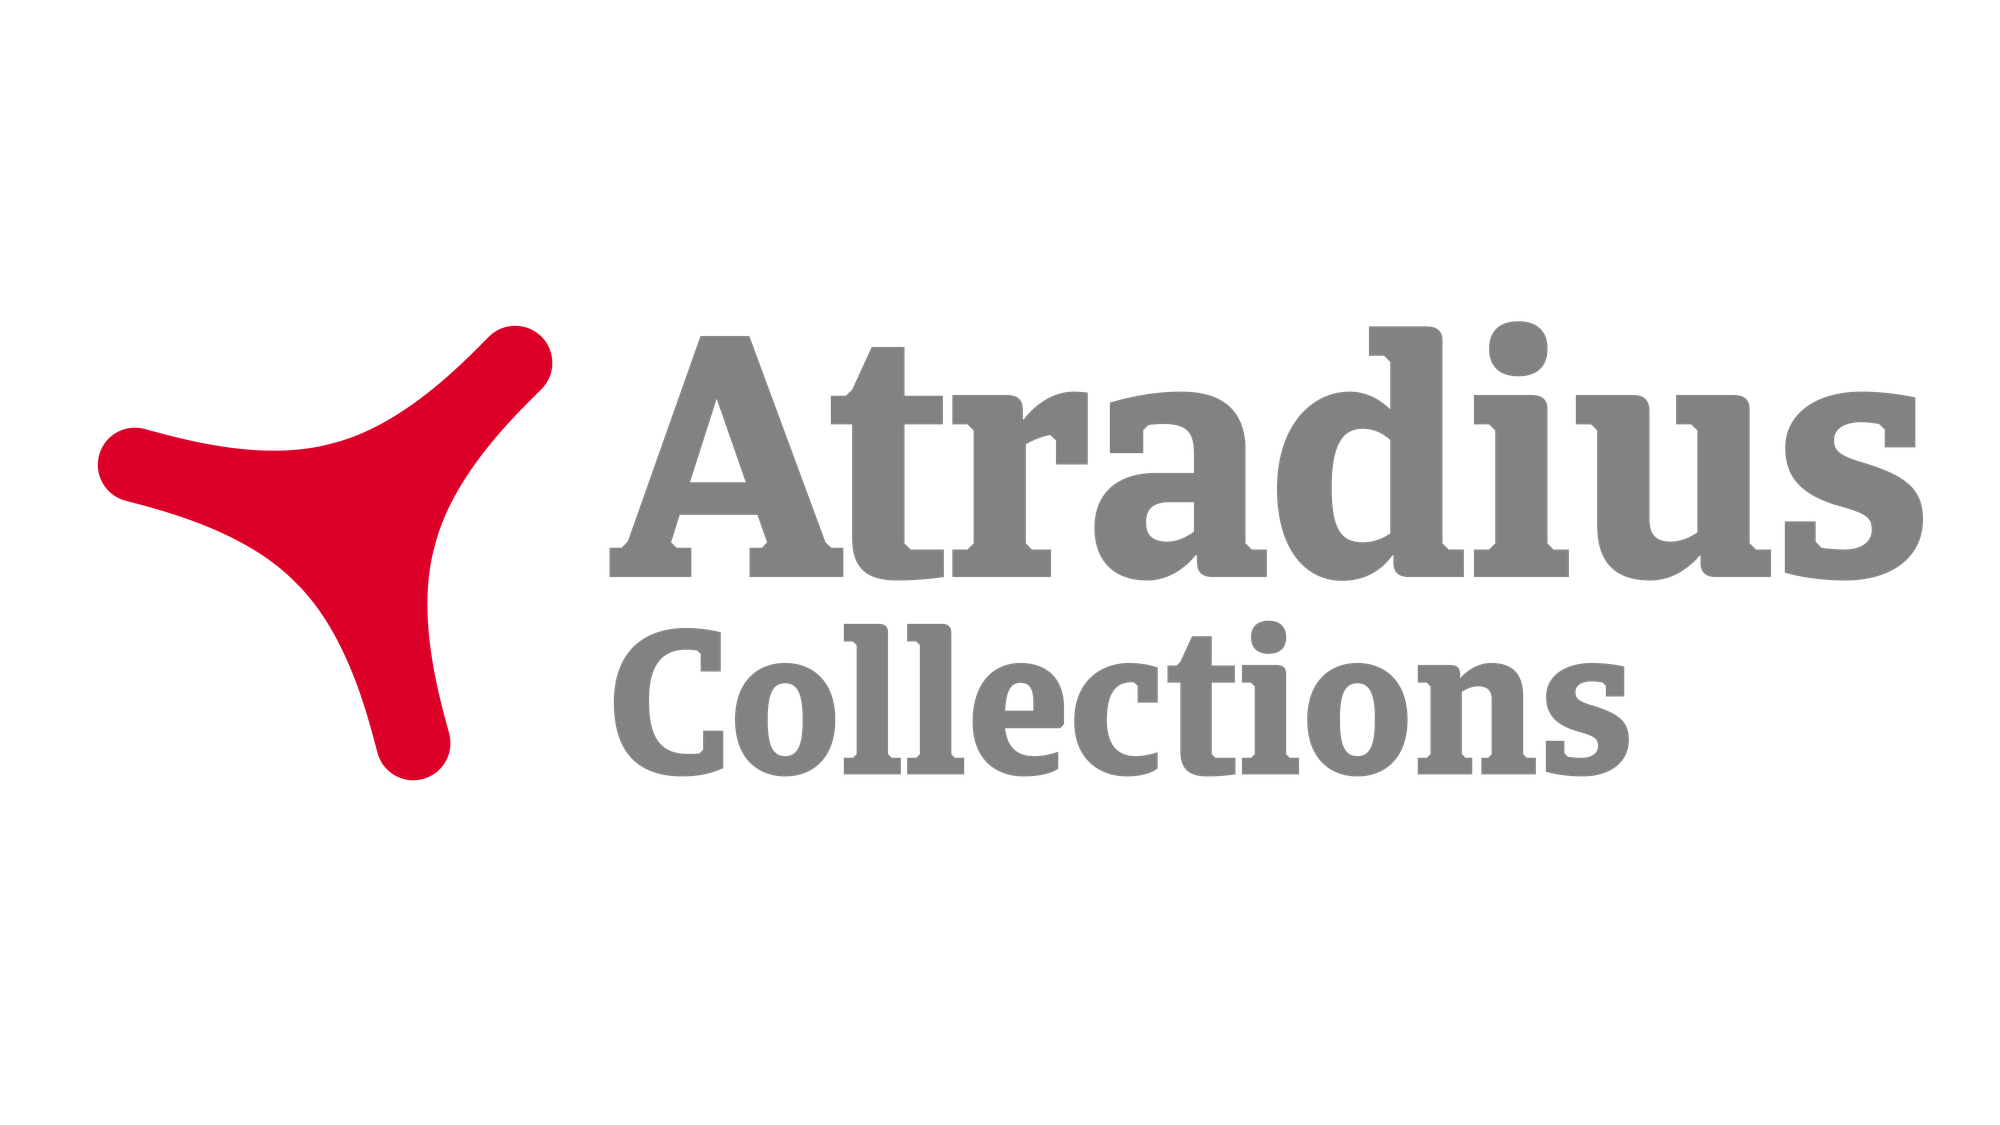 FEBIS welcomes  Atradius Collections B.V. as a new member